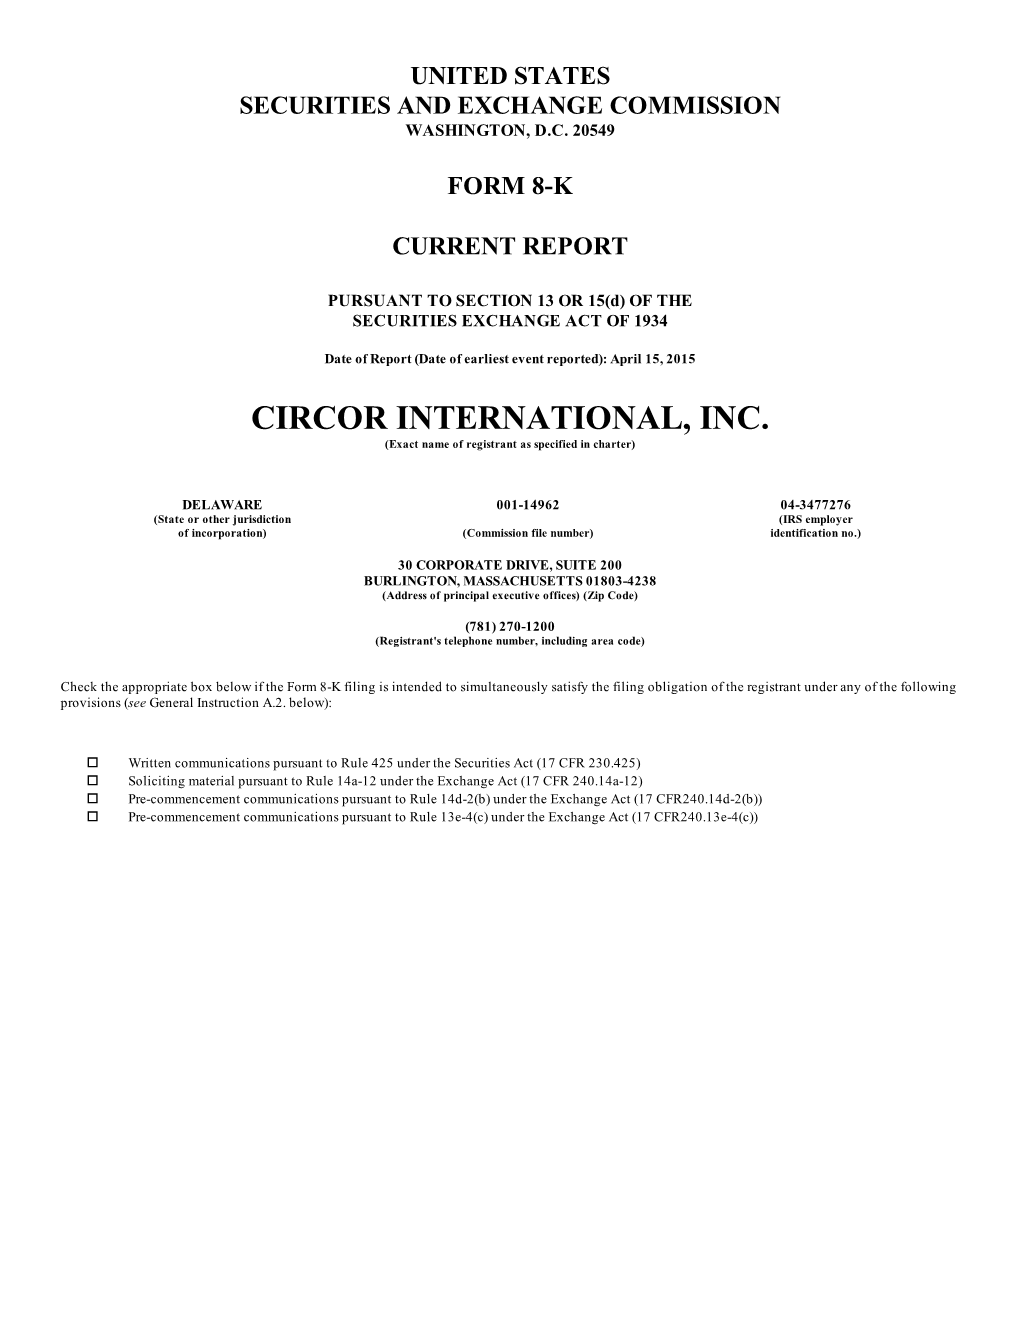 CIRCOR INTERNATIONAL, INC. (Exact Name of Registrant As Specified in Charter)